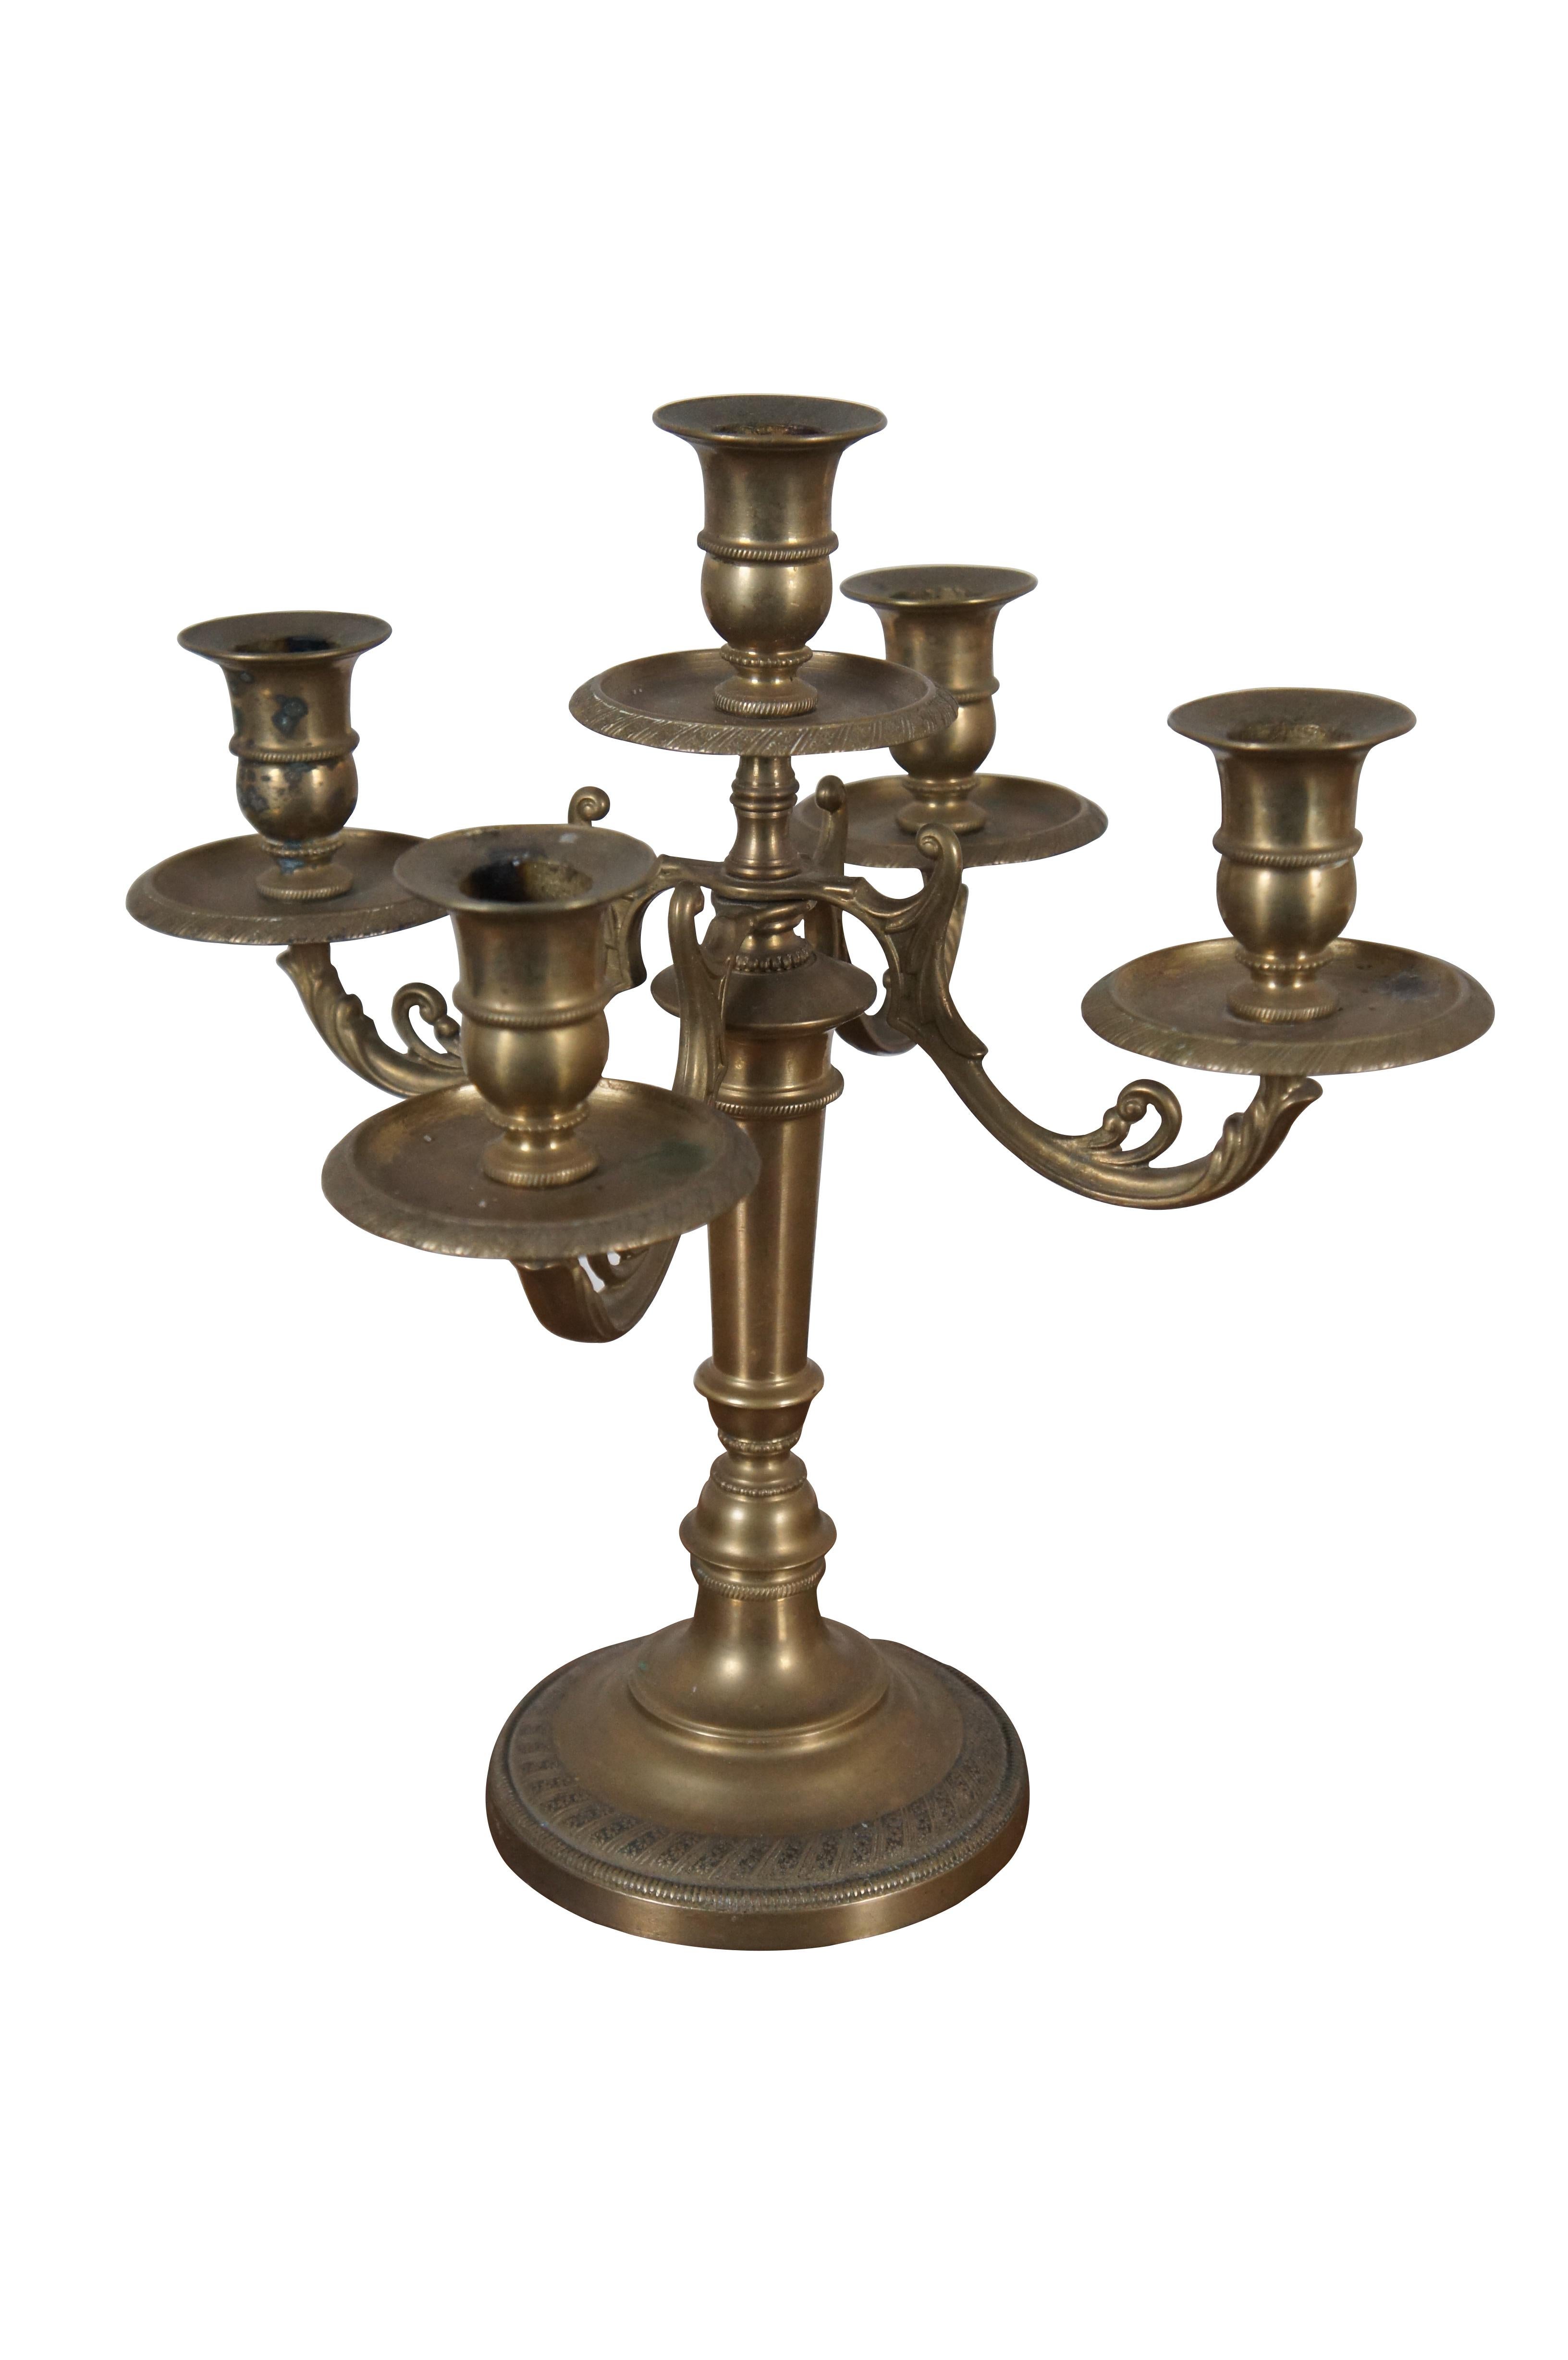 Two mid 20th century Art Nouveau style brass candlesticks featuring five lights with a floral acanthus motif.

Dimensions:
11